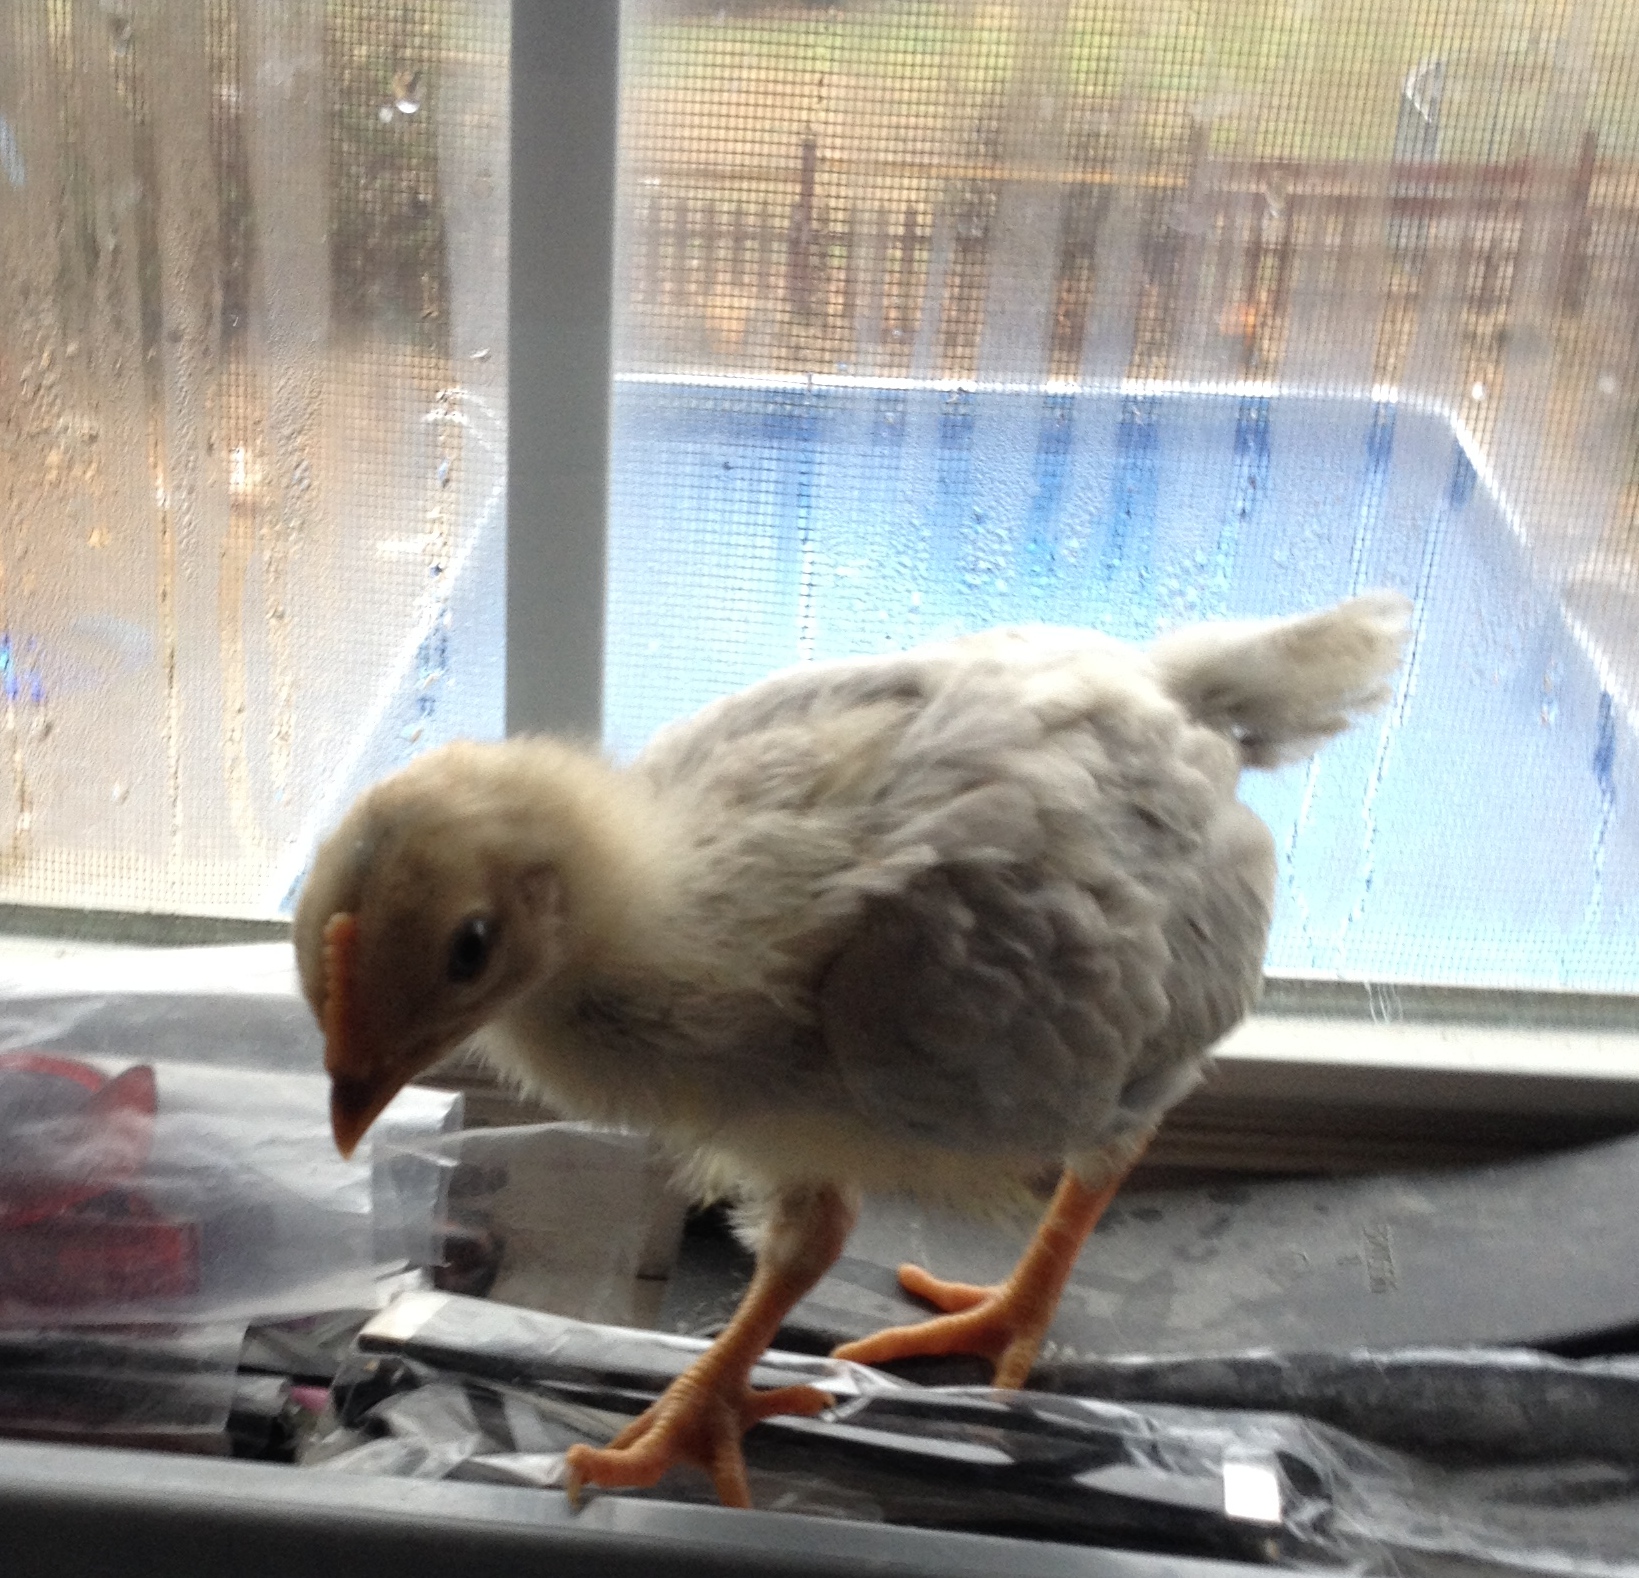 We all hate single digit temps and having to brood indoors! A week old isabel cockerel escapee from the brooder.